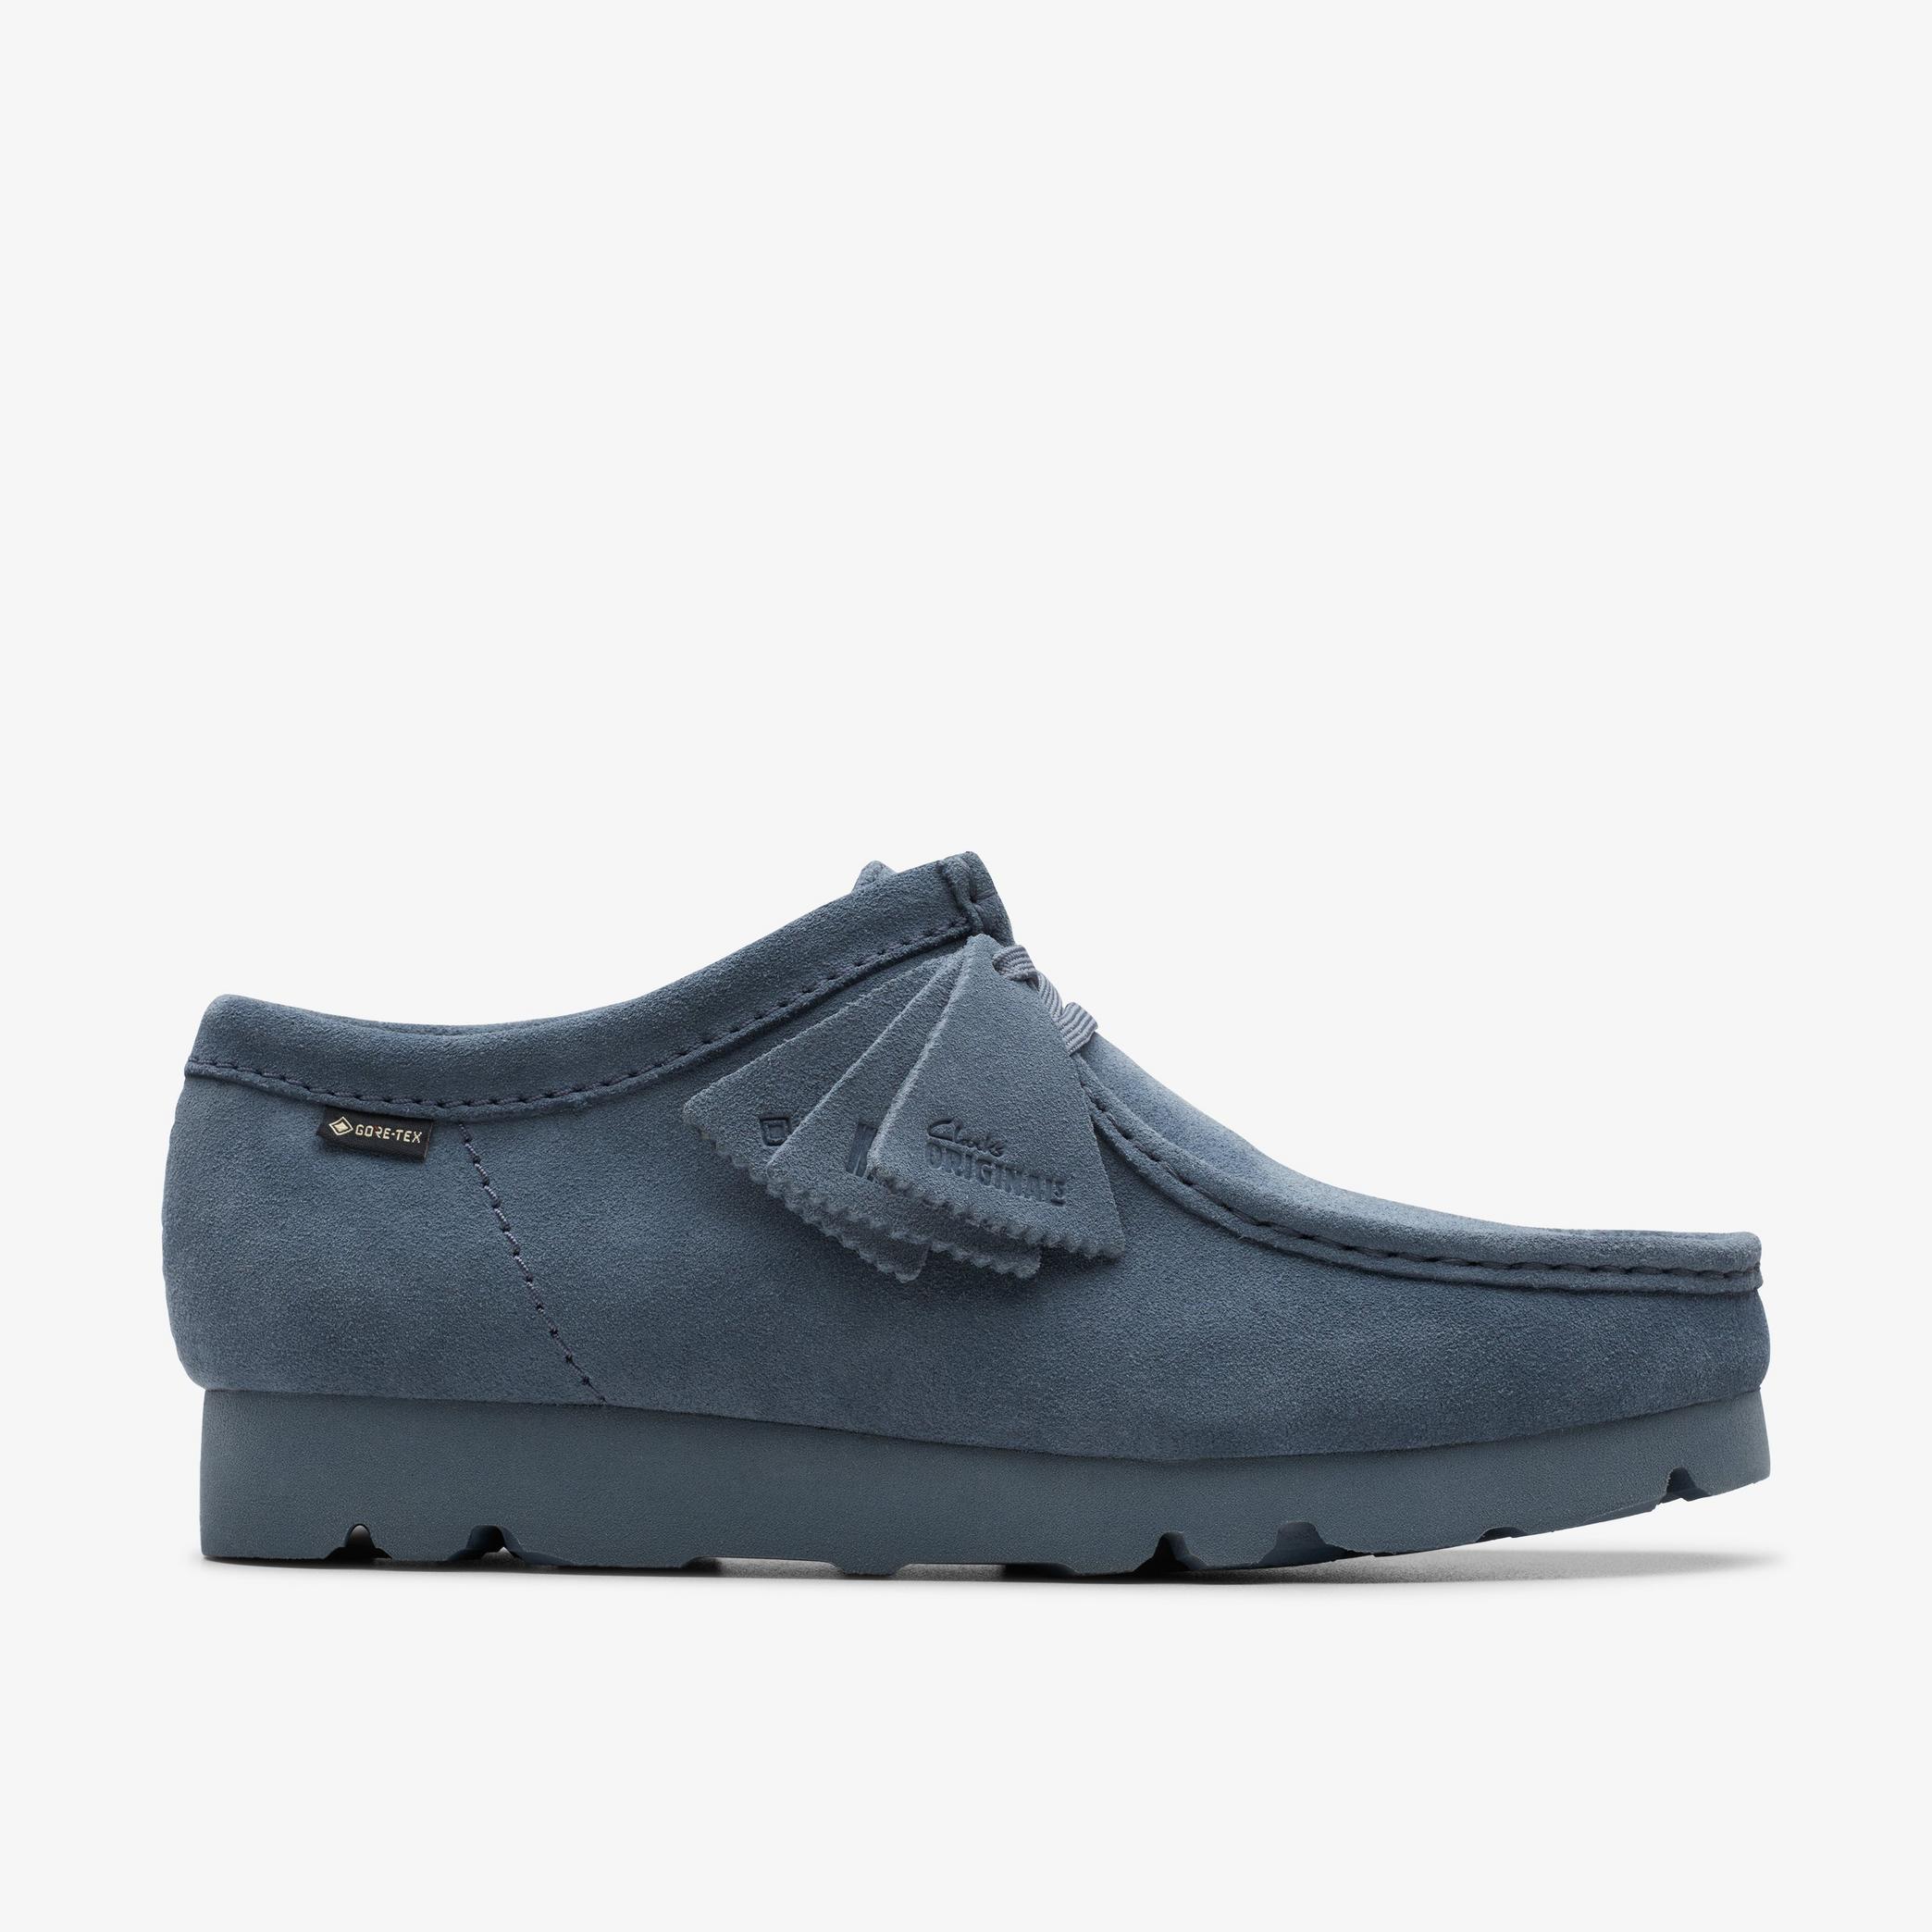 Wallabee GORE-TEX Blue/Grey Suede Shoes, view 1 of 7